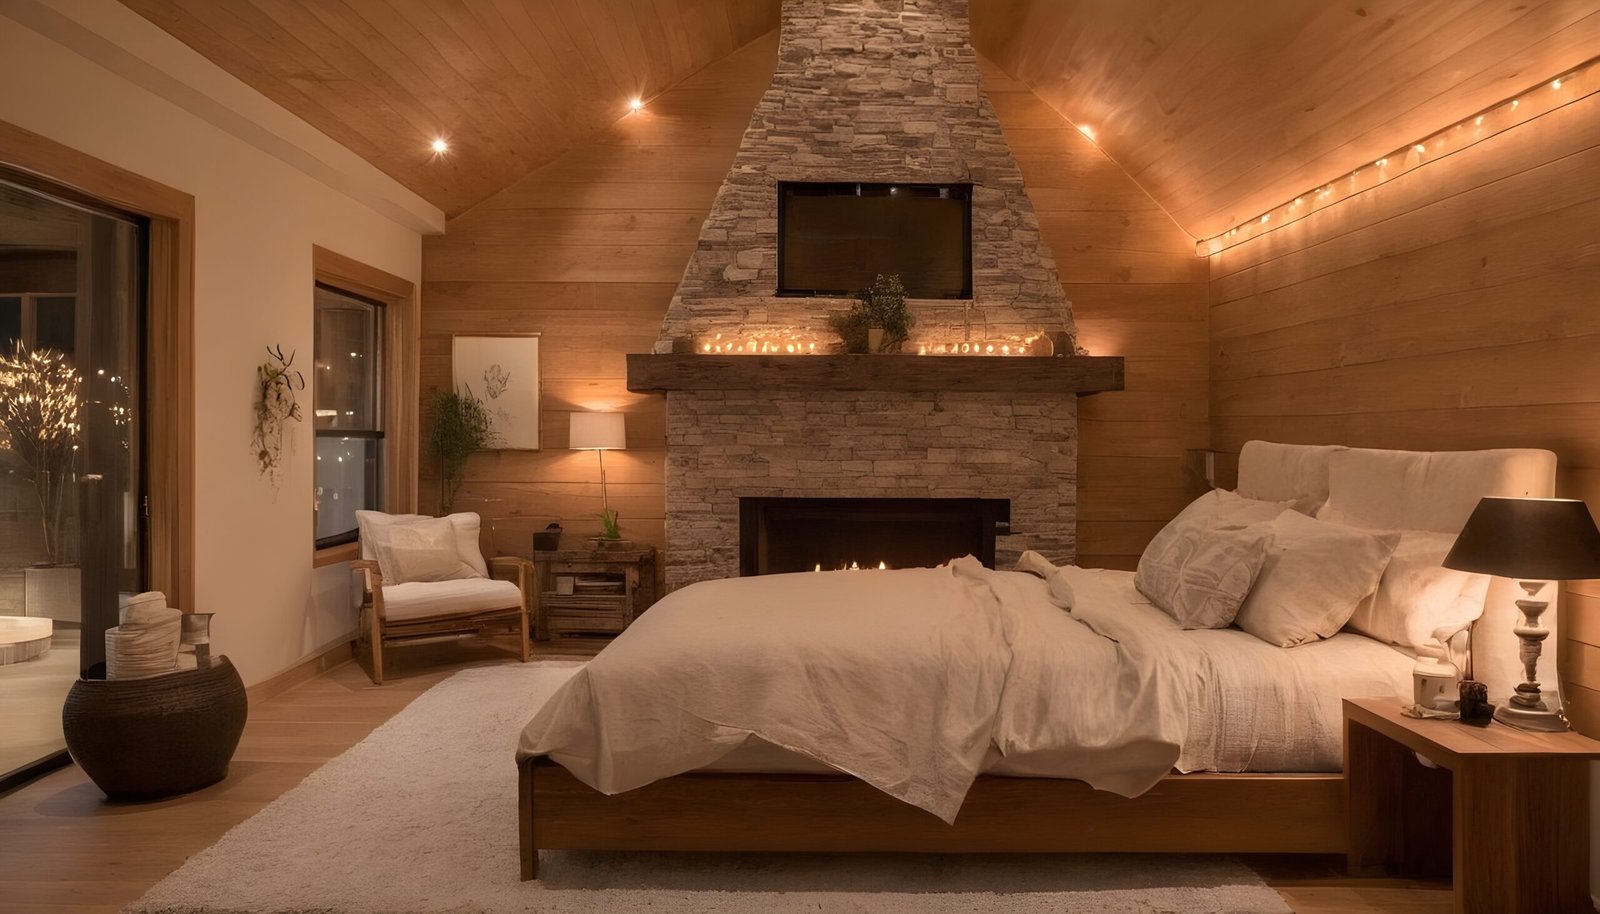 A beautiful bedroom with wooden home decor, warm lights and a fireplace.